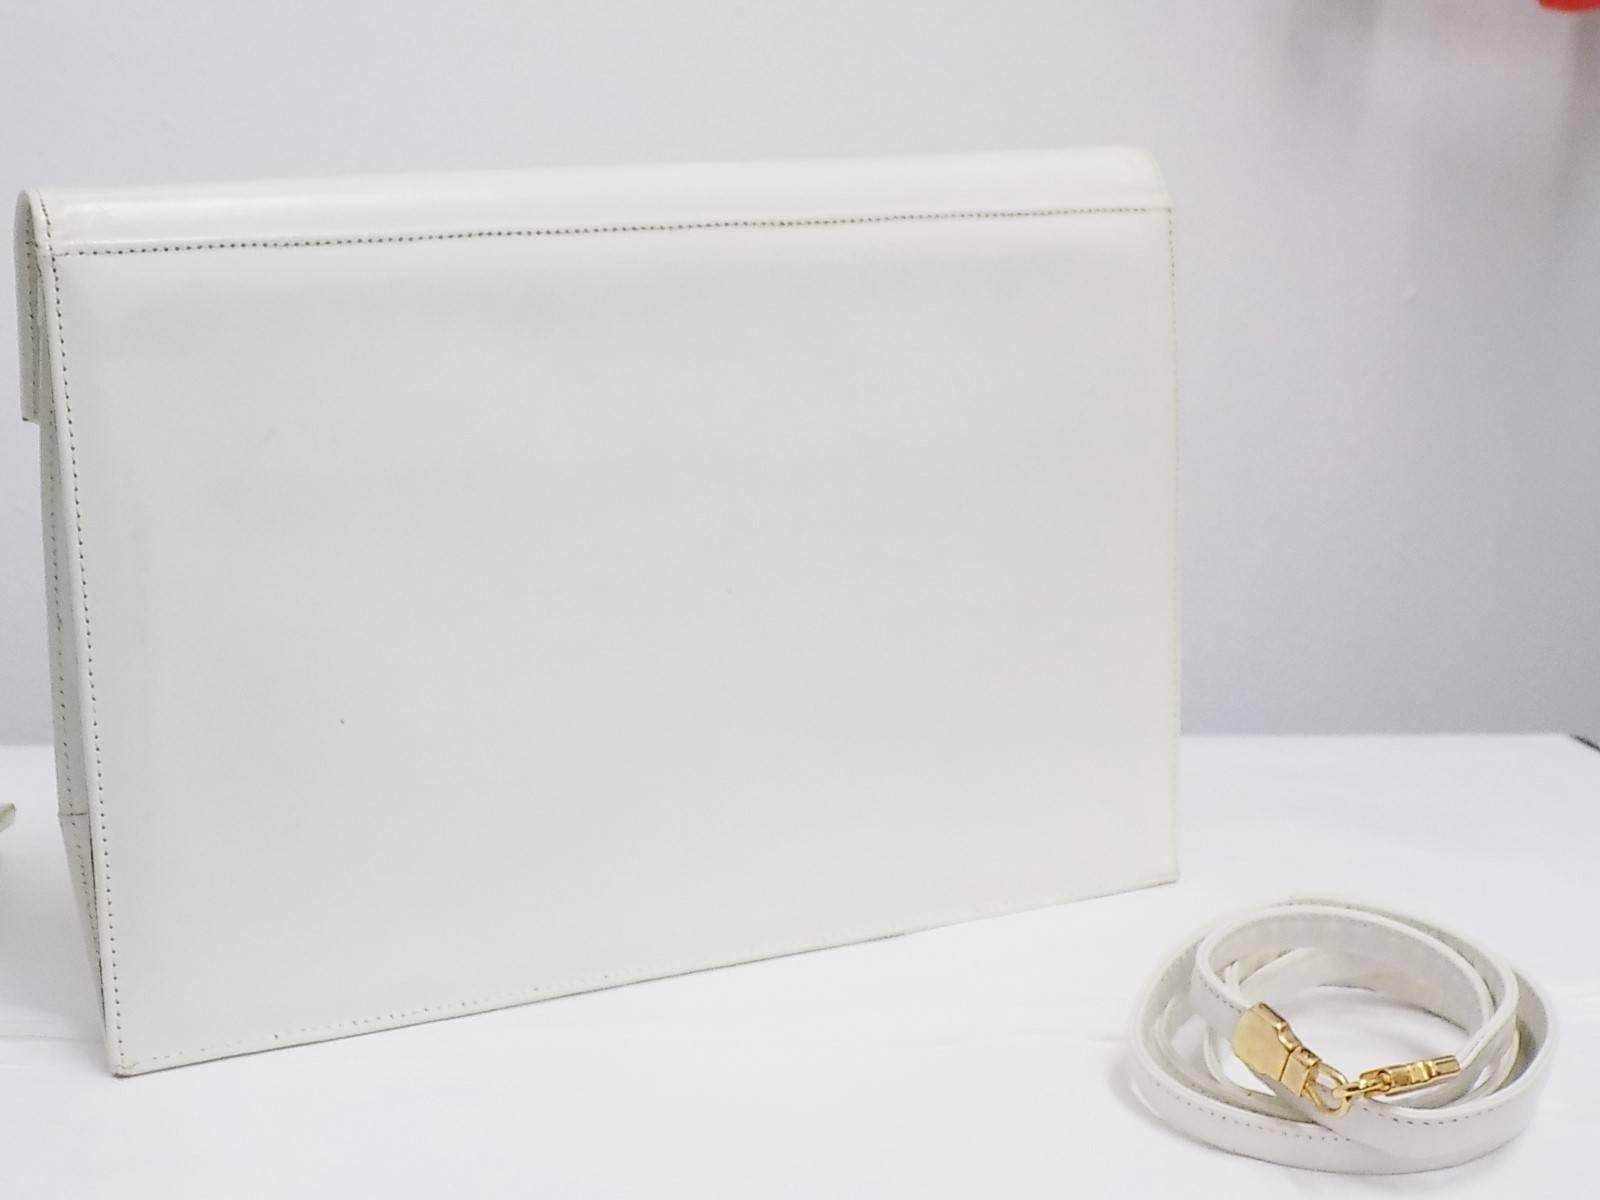 Beautiful  piece of American designer history. STUART WEITZMAN Art deco  vintage envelope clutch bag with shoulder strap . Well structured with clear window front and multi colors leather. Very clean and in great condition. Only signs of the age is